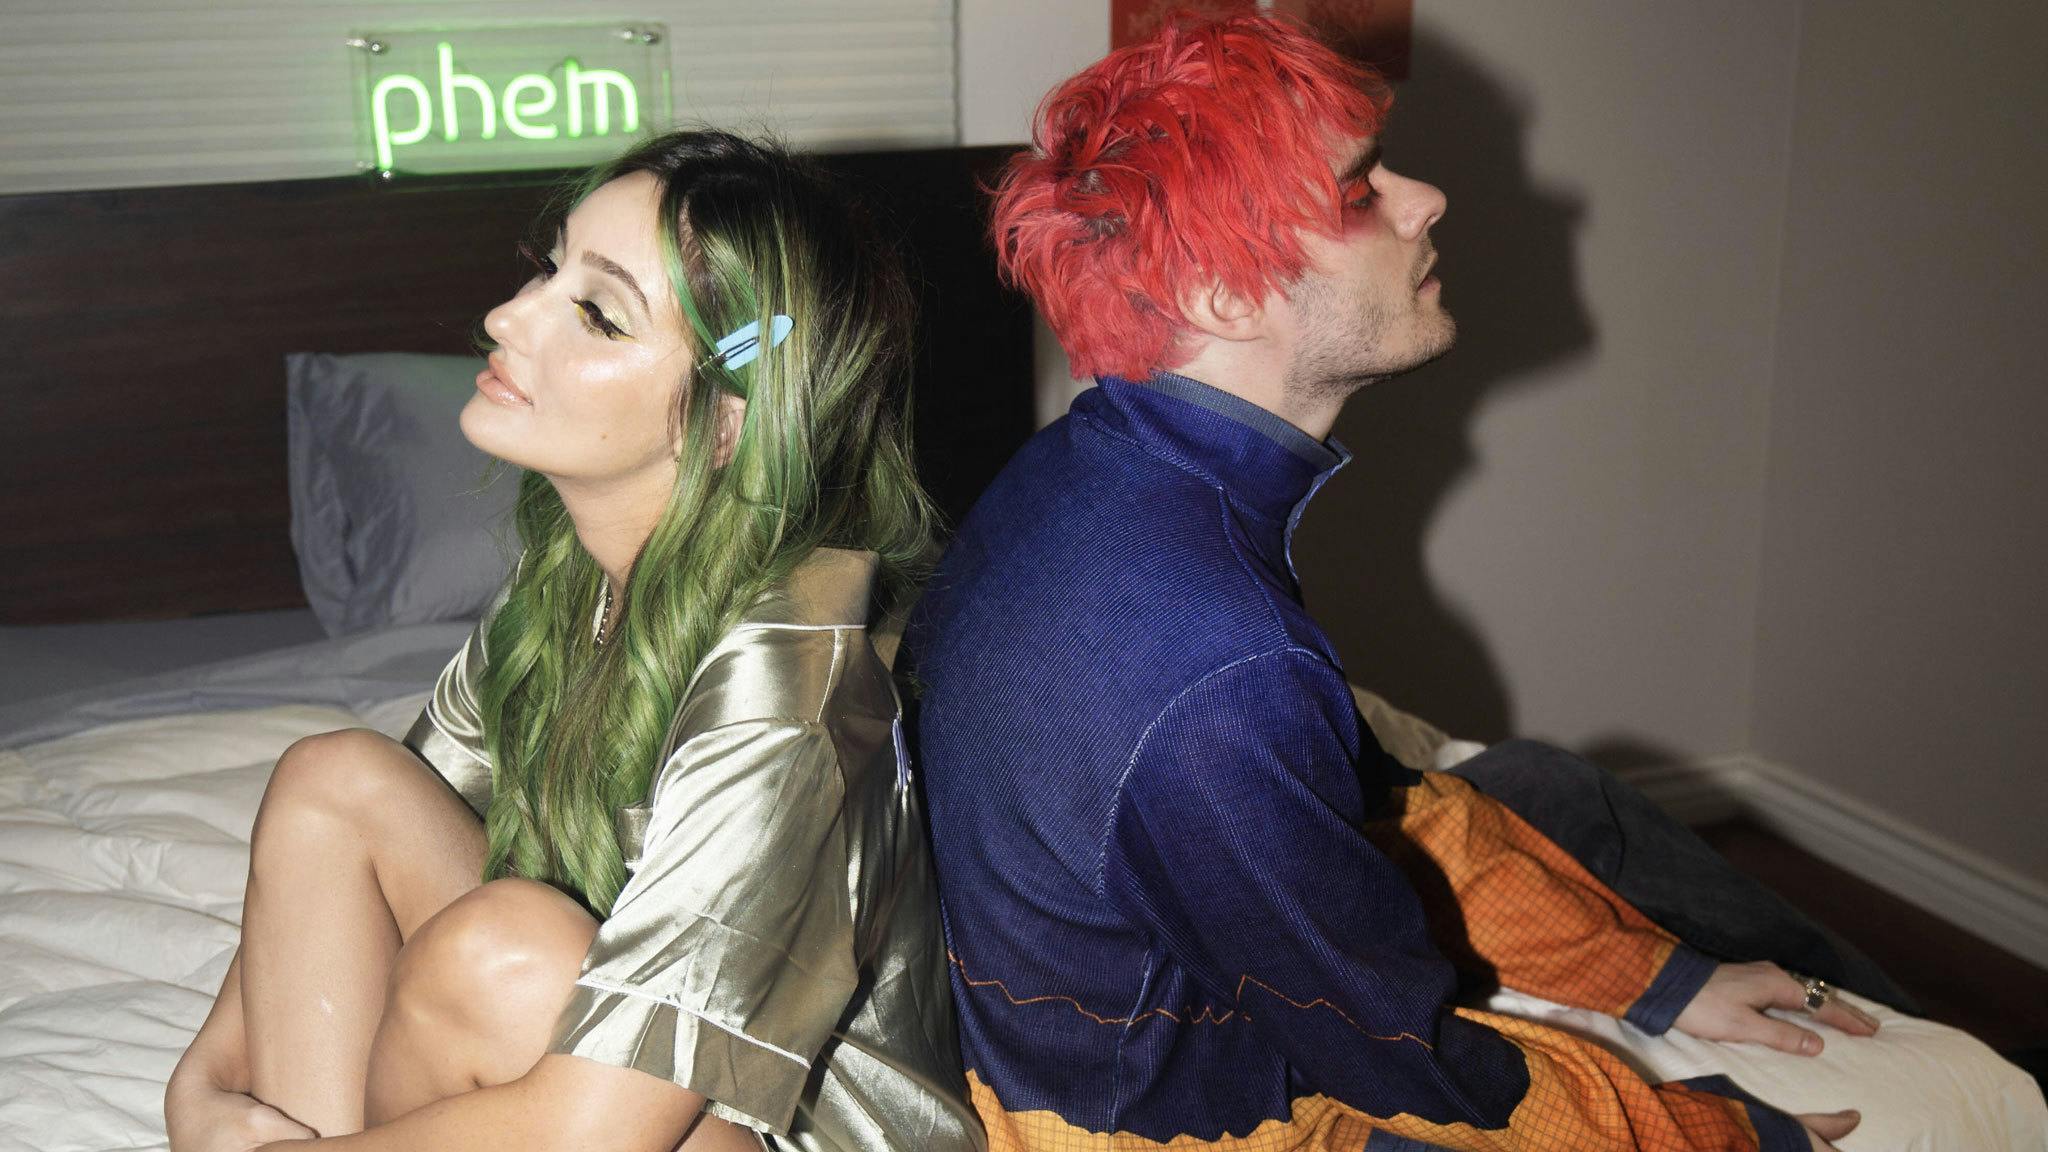 phem has released a new collab with Waterparks’ Awsten Knight